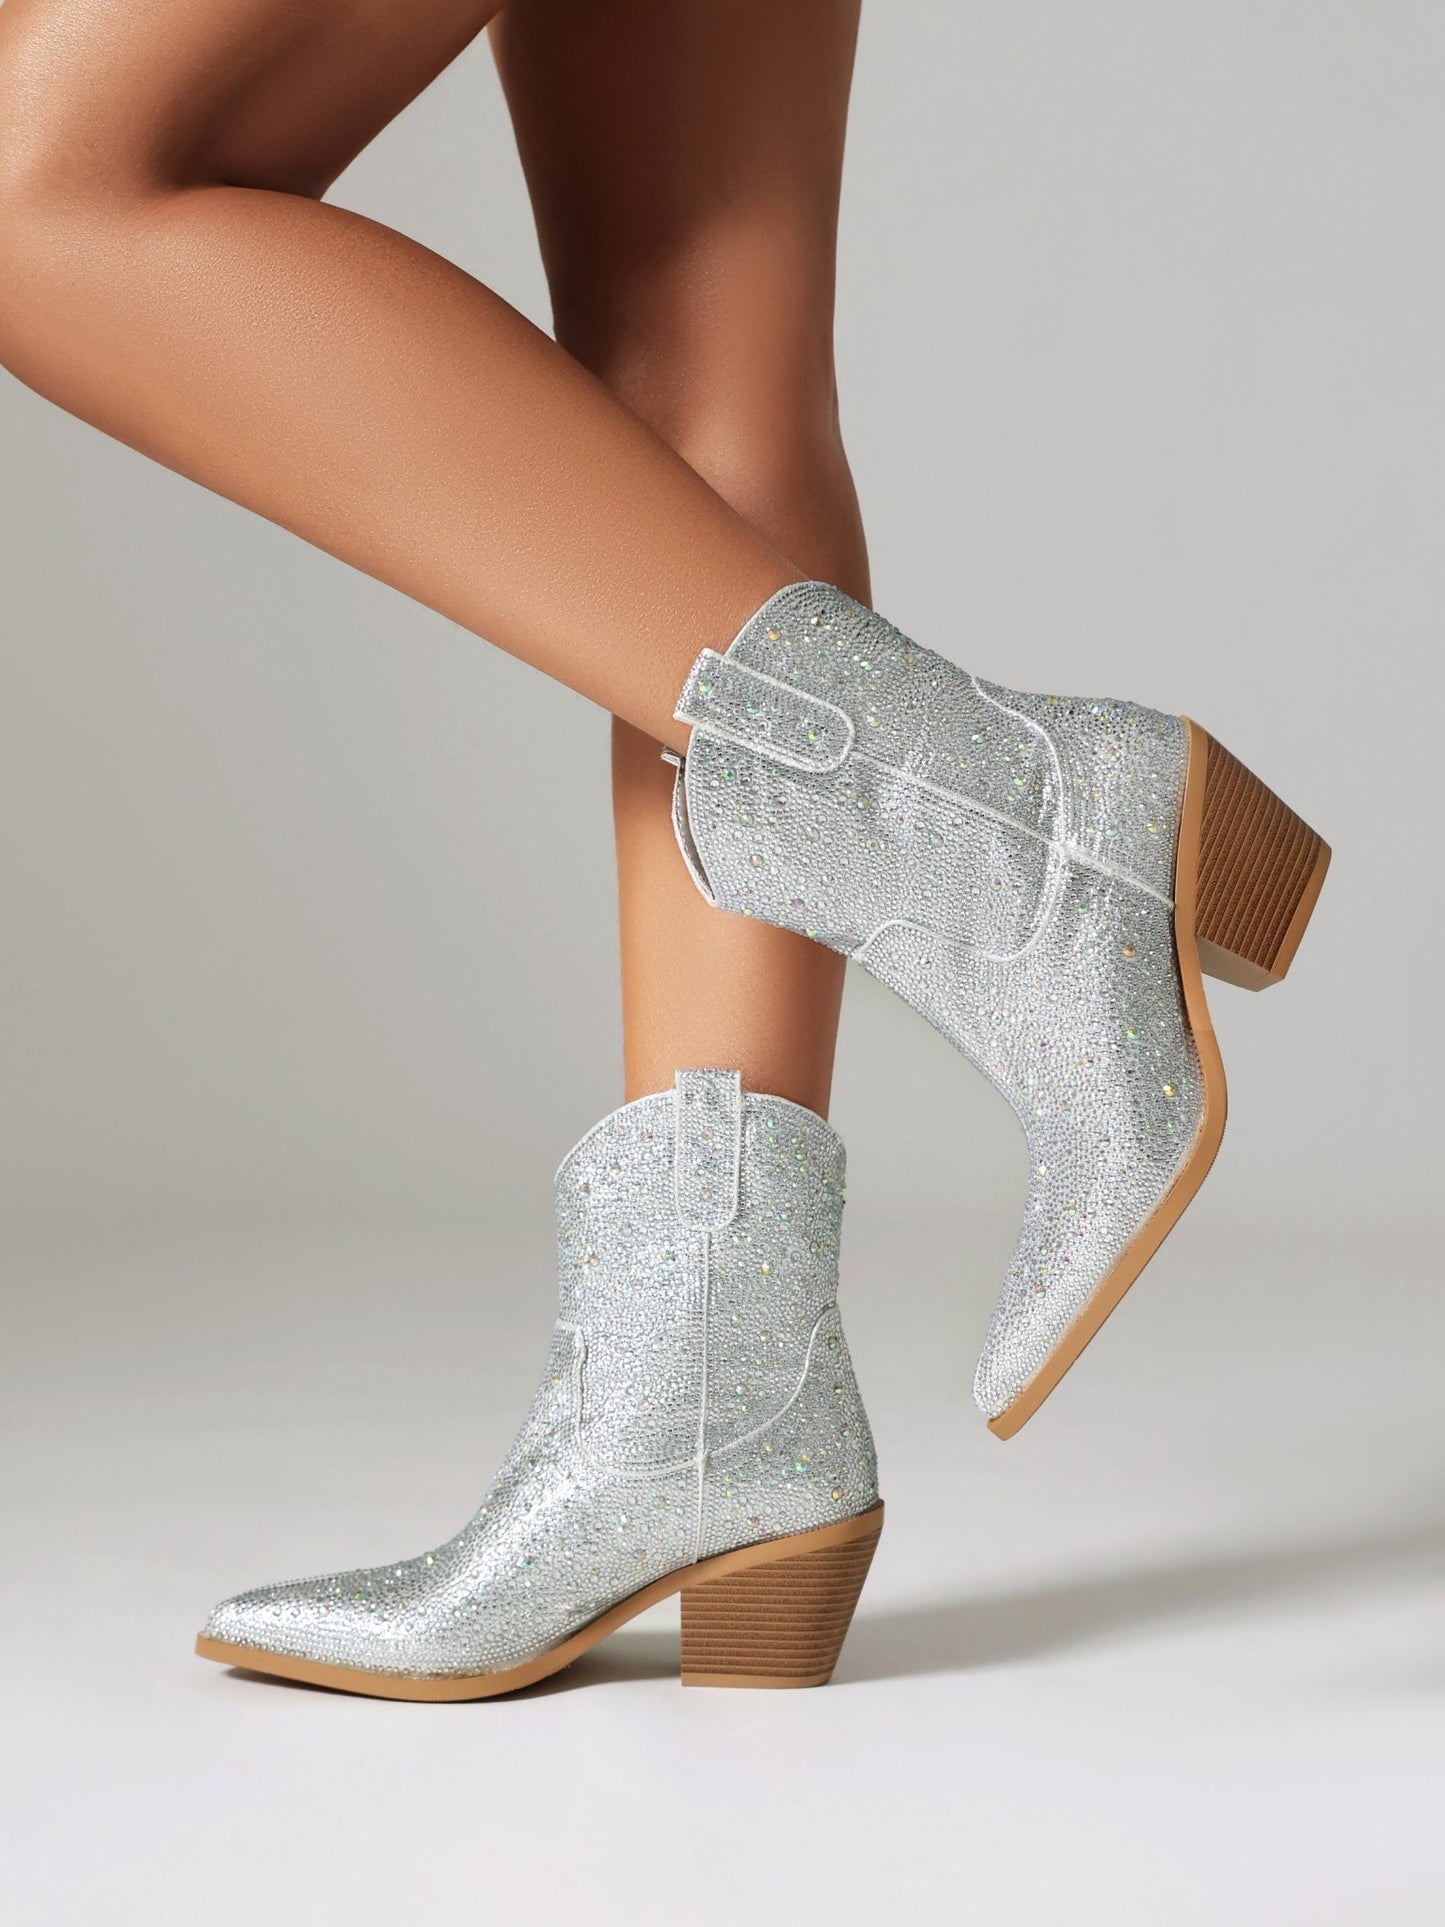 Clarie 70 Glitter Mid Calf Boots - Vivianly Shoes - Ankle Boots